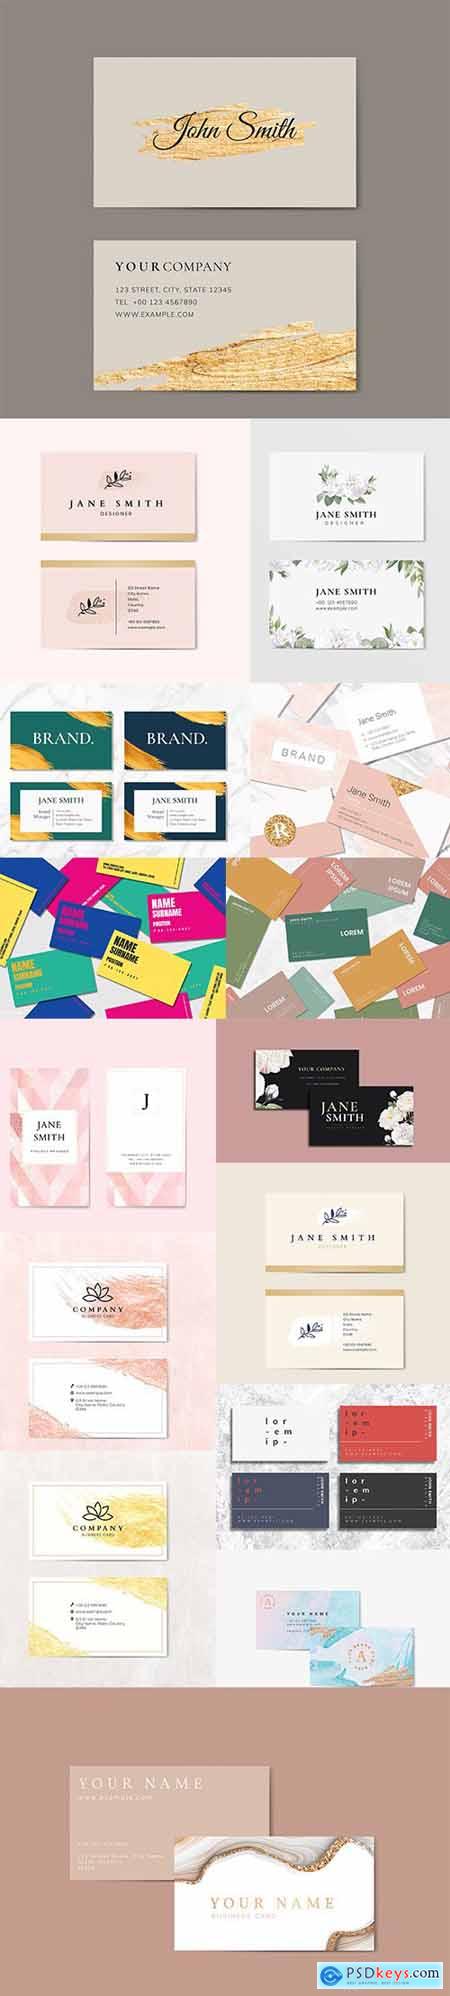 Set of Professional Business Card Templates vol5